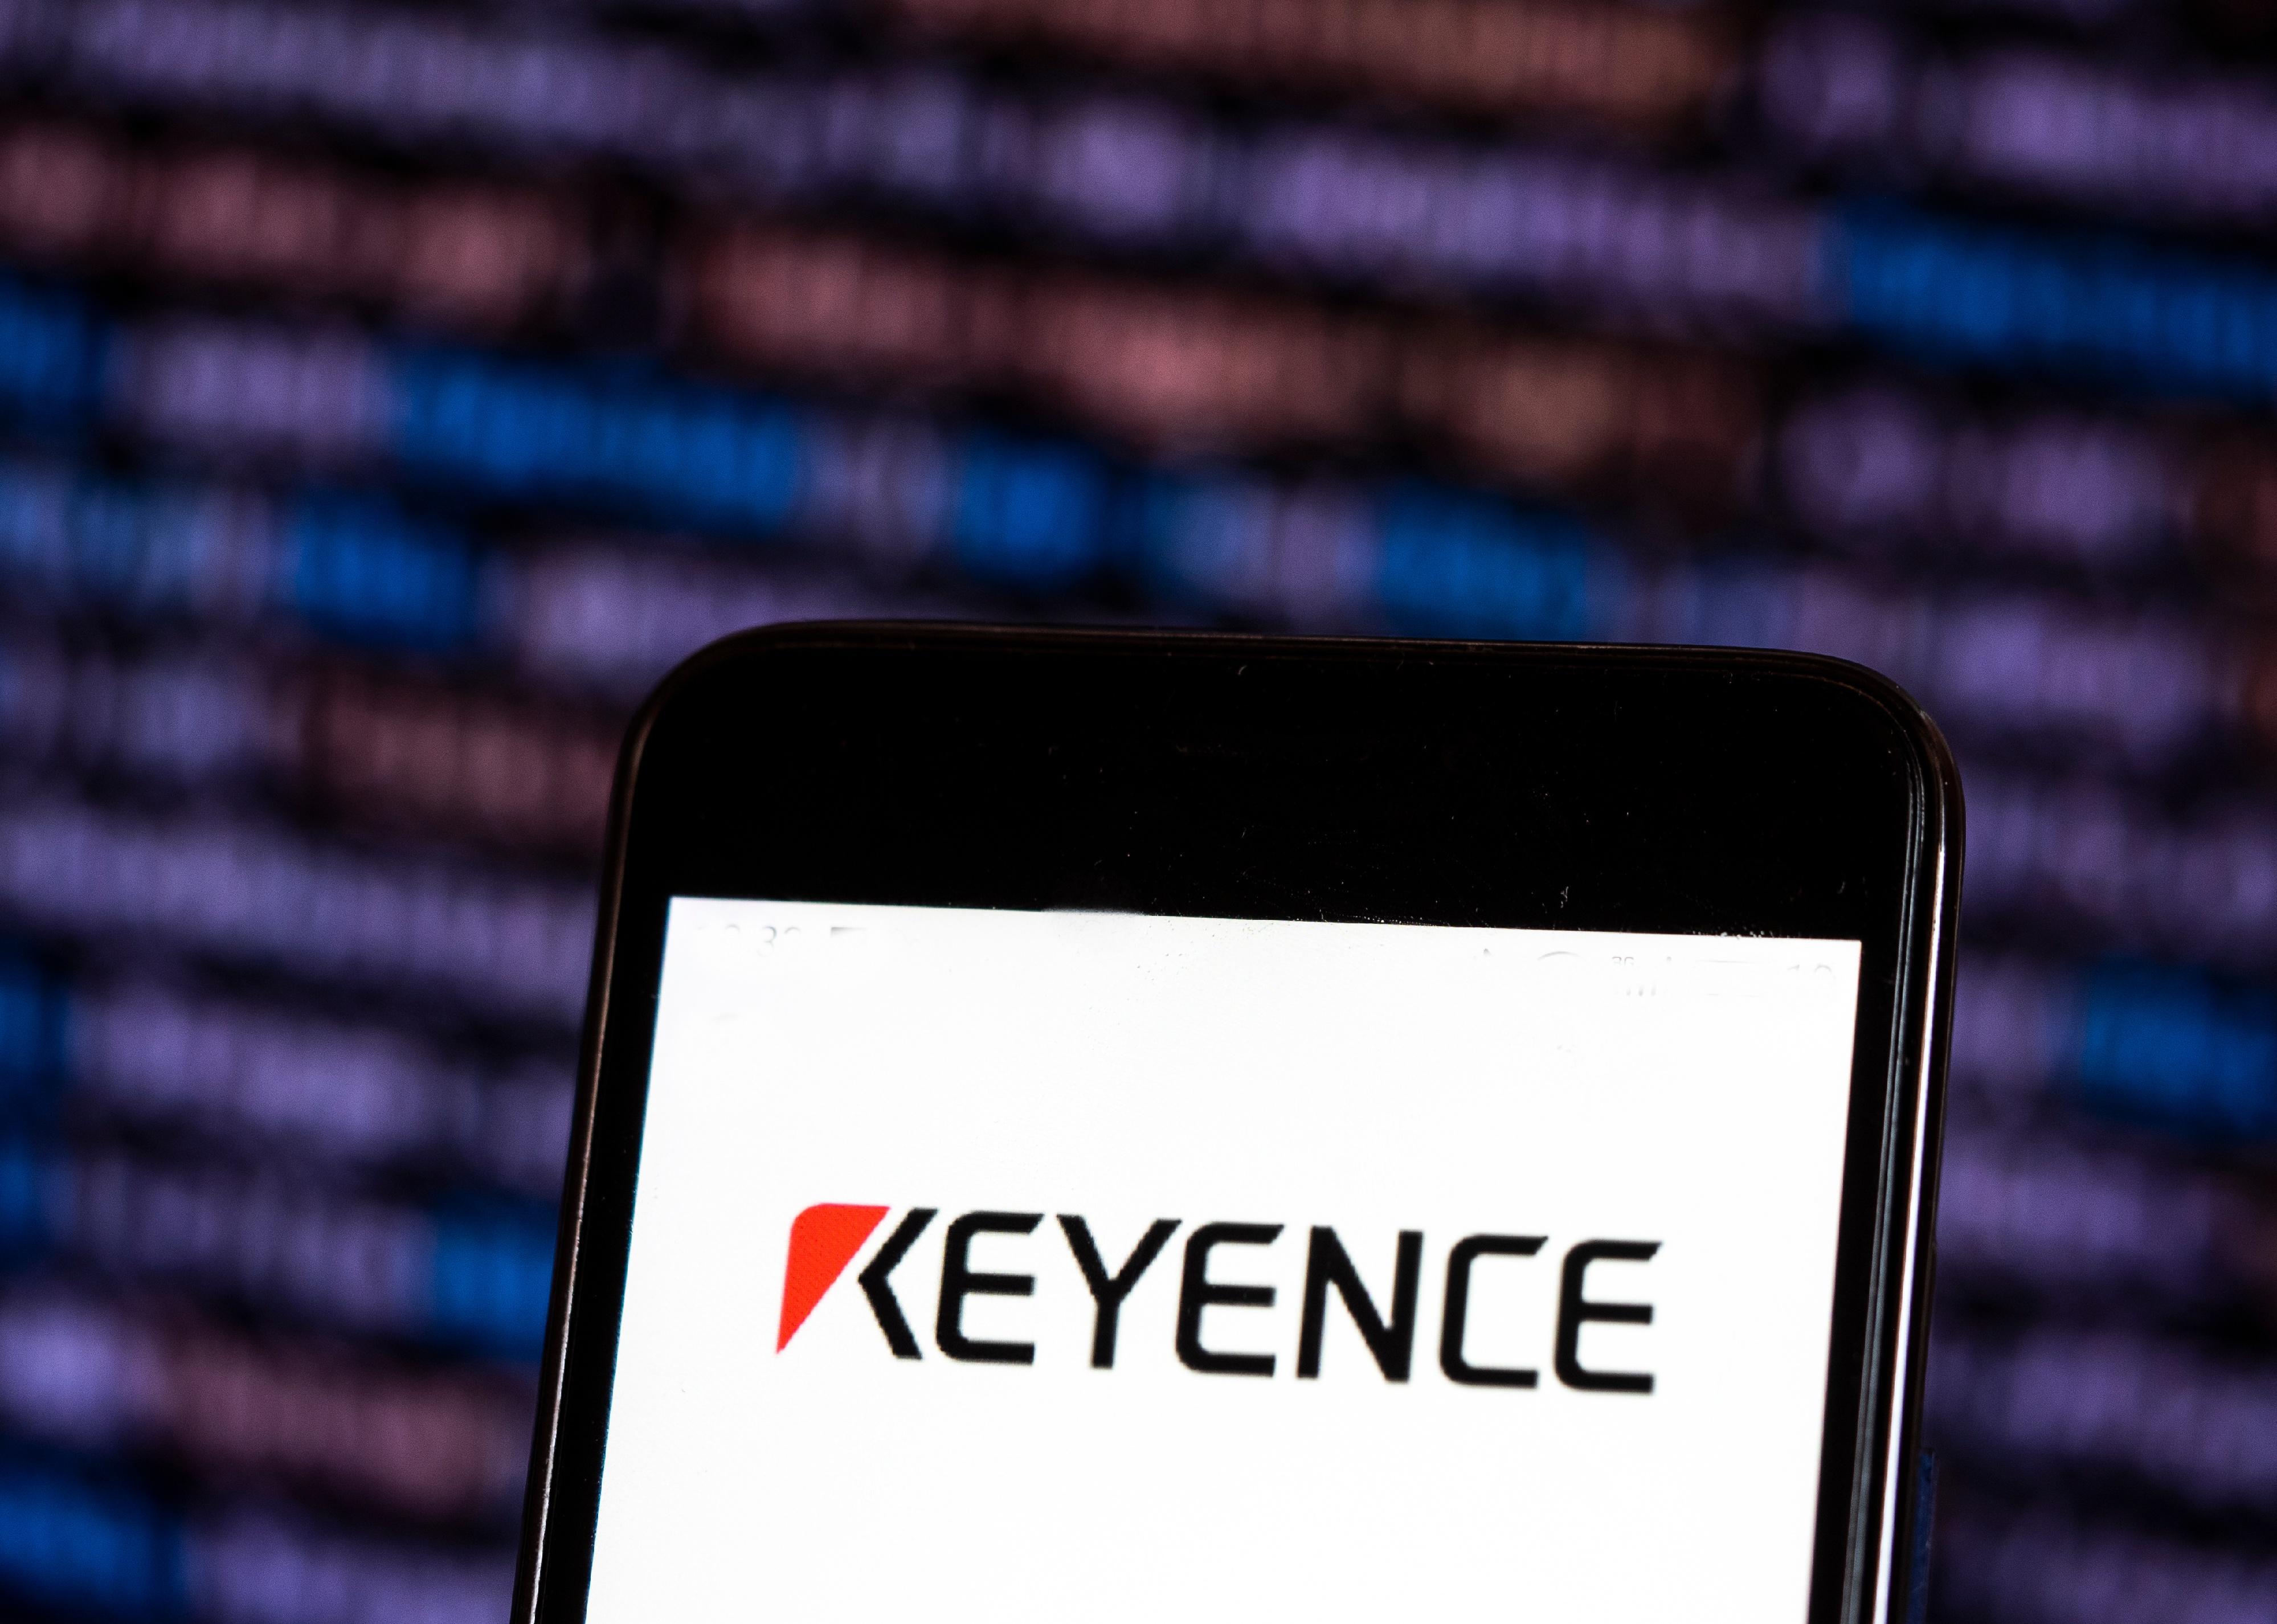 The Keyence logo on the screen of a smartphone. 